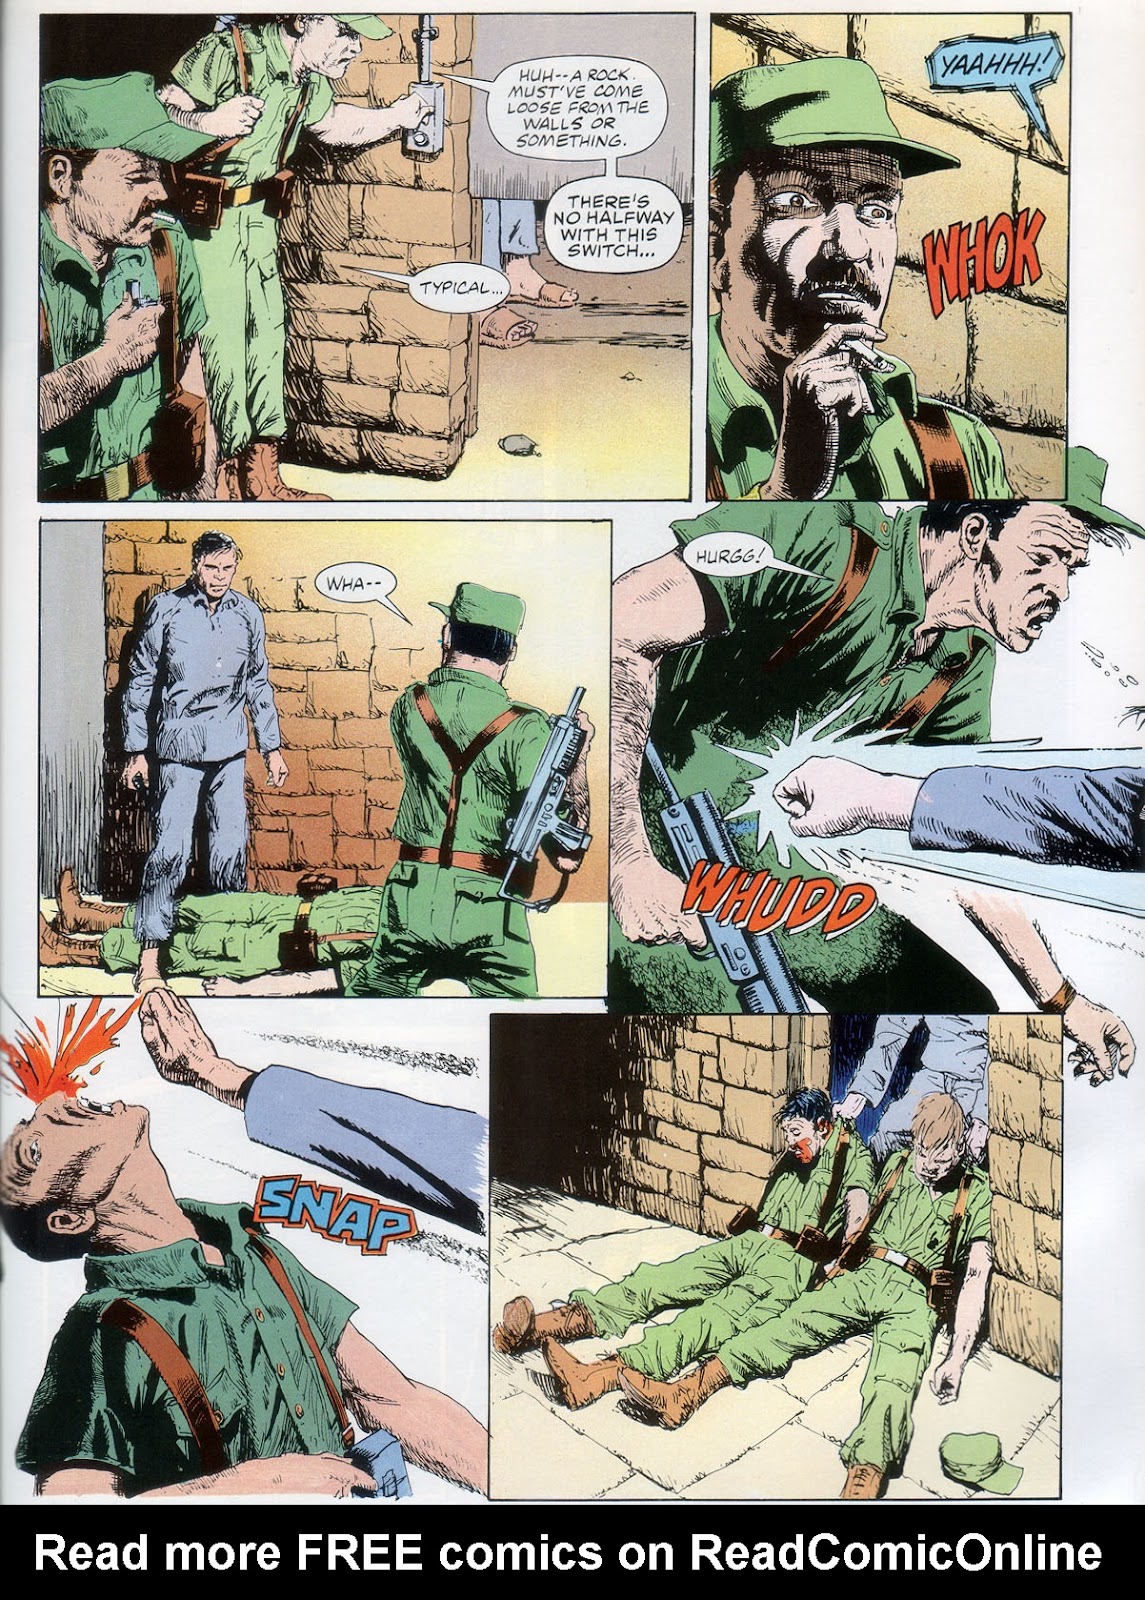 Marvel Graphic Novel issue 57 - Rick Mason - The Agent - Page 63